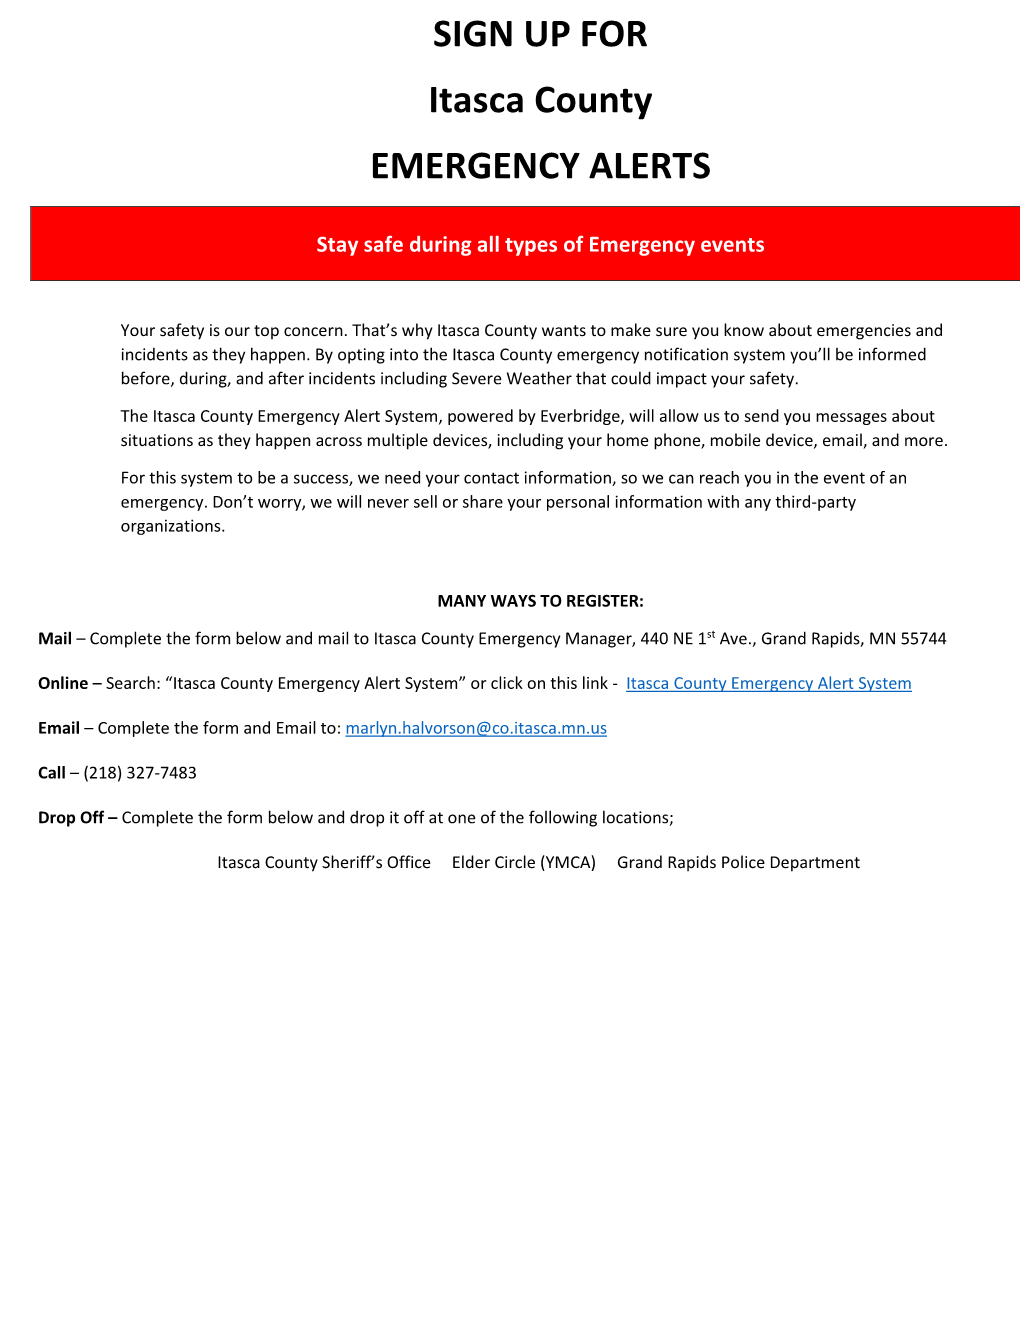 SIGN up for Itasca County EMERGENCY ALERTS